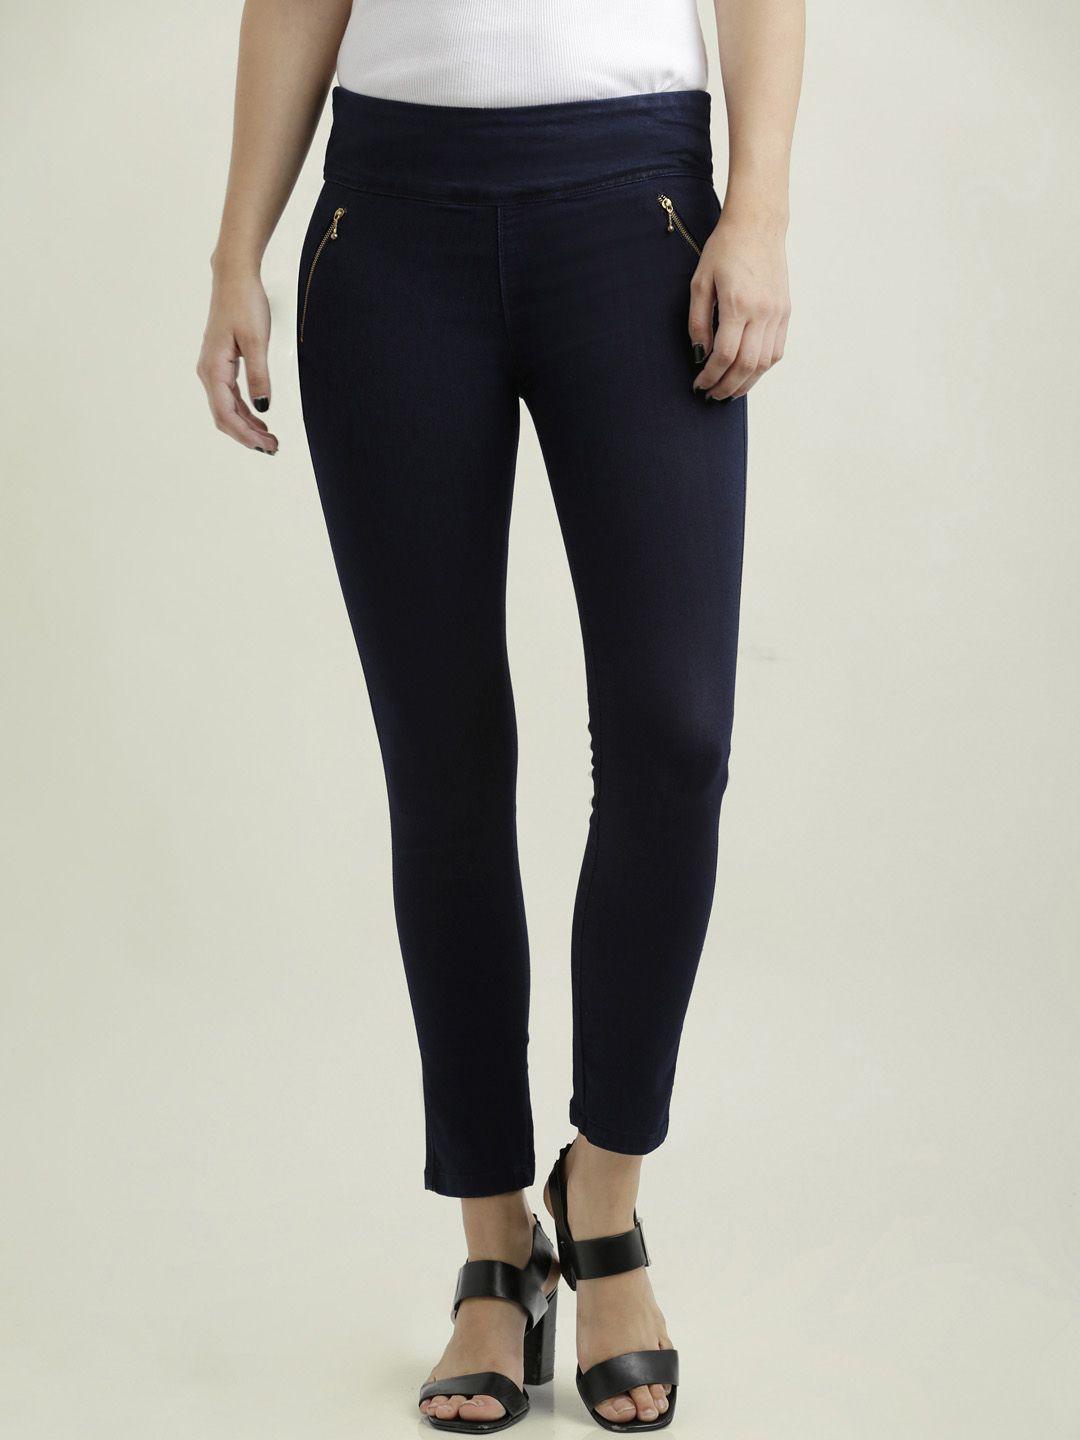 miss-chase-solid-blue-super-skinny-high-rise-jeggings